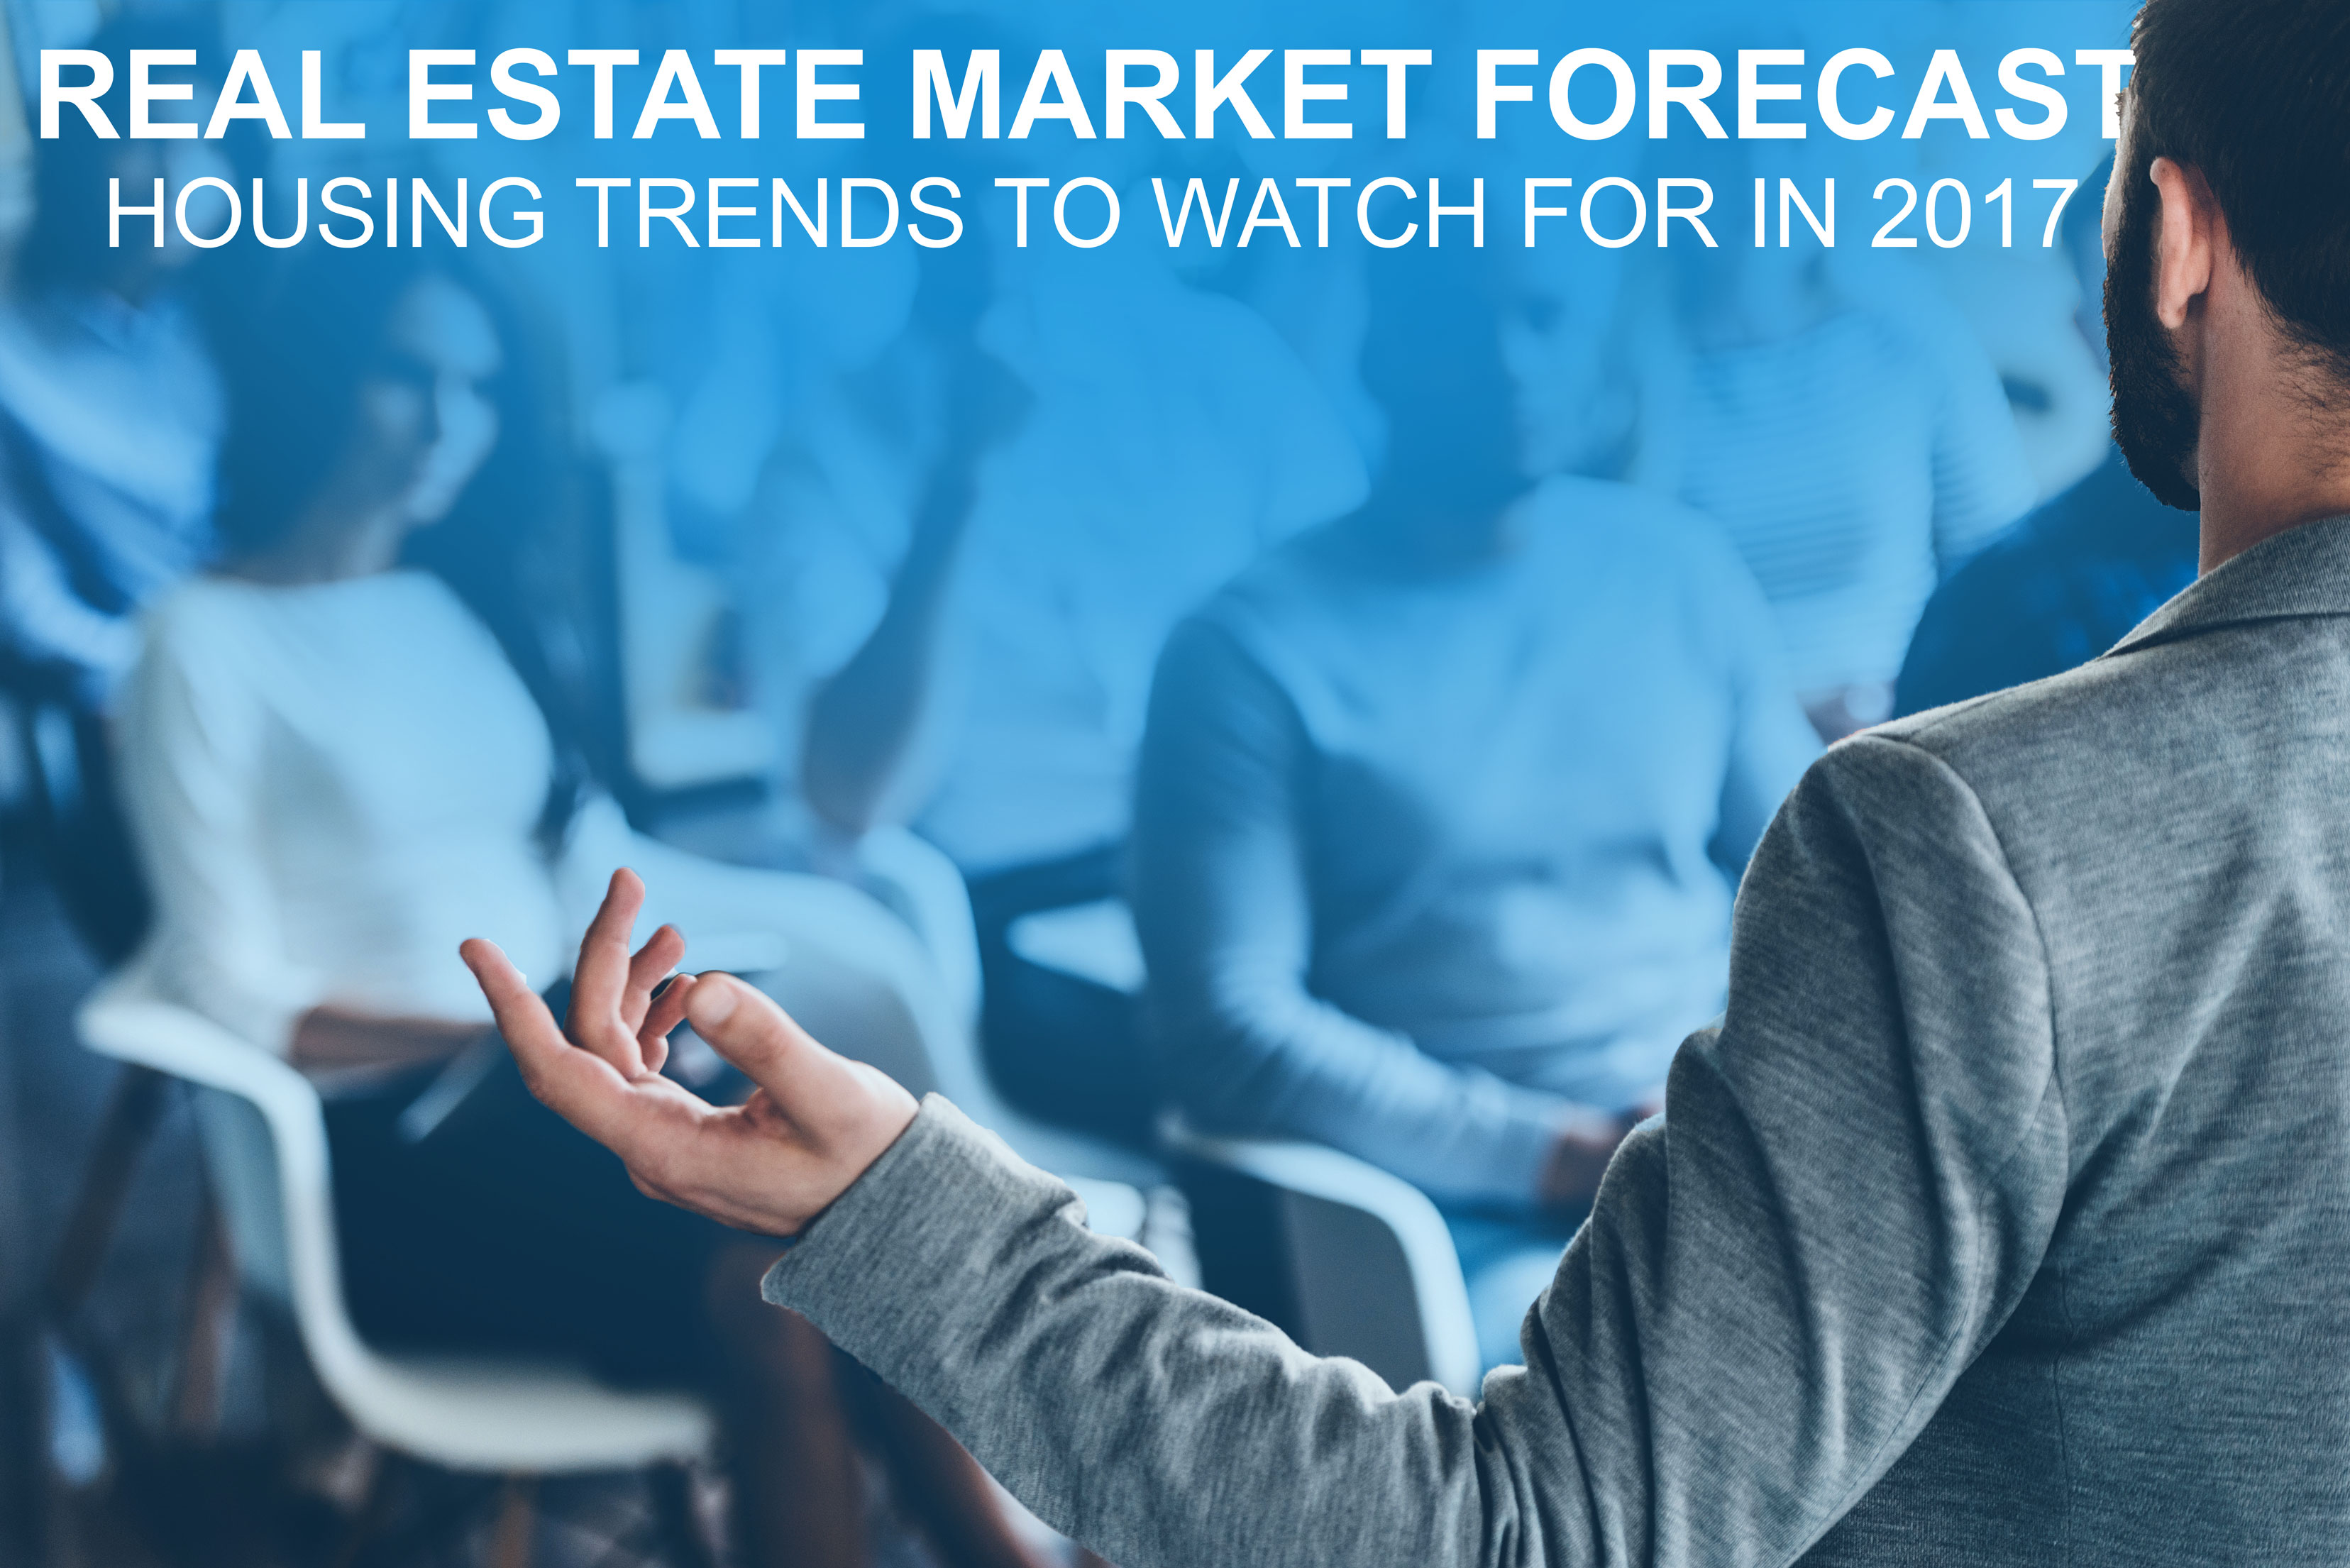 Real Estate Market Forecast: Housing Market Trends to Watch For in 2017